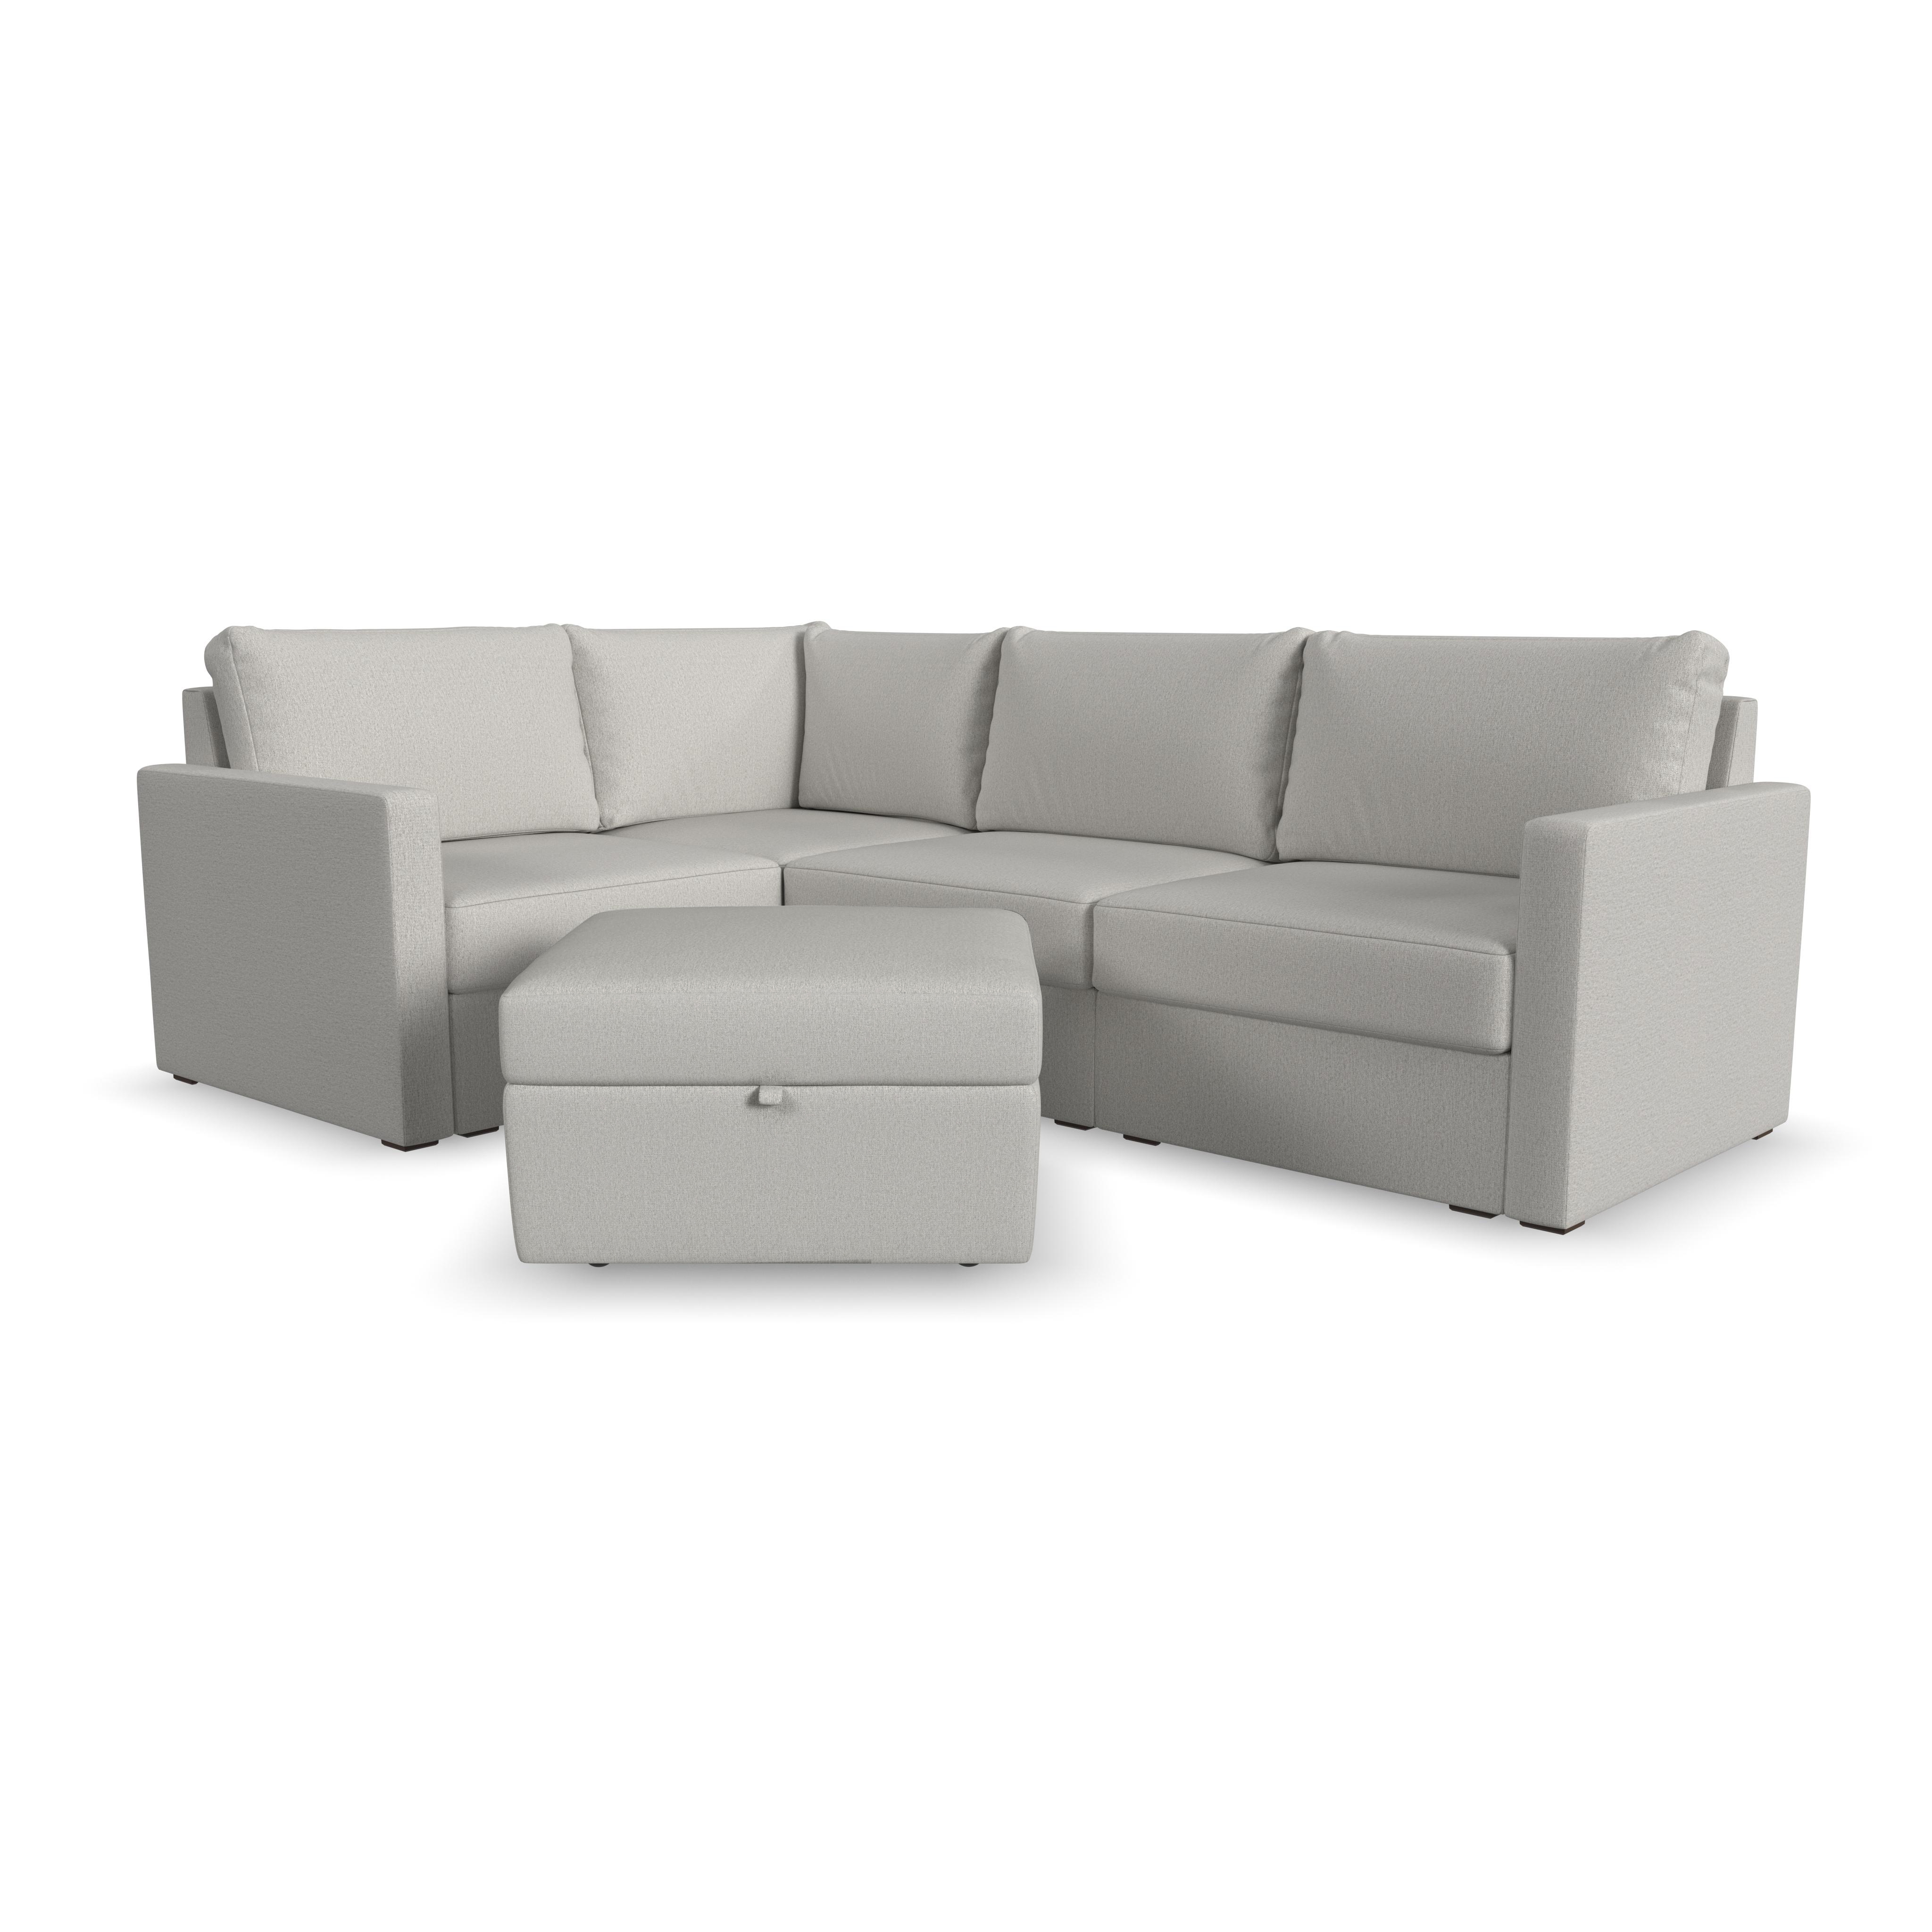 Flexsteel Flex 4-Seat Sectional with Standard Arm and Storage Ottoman